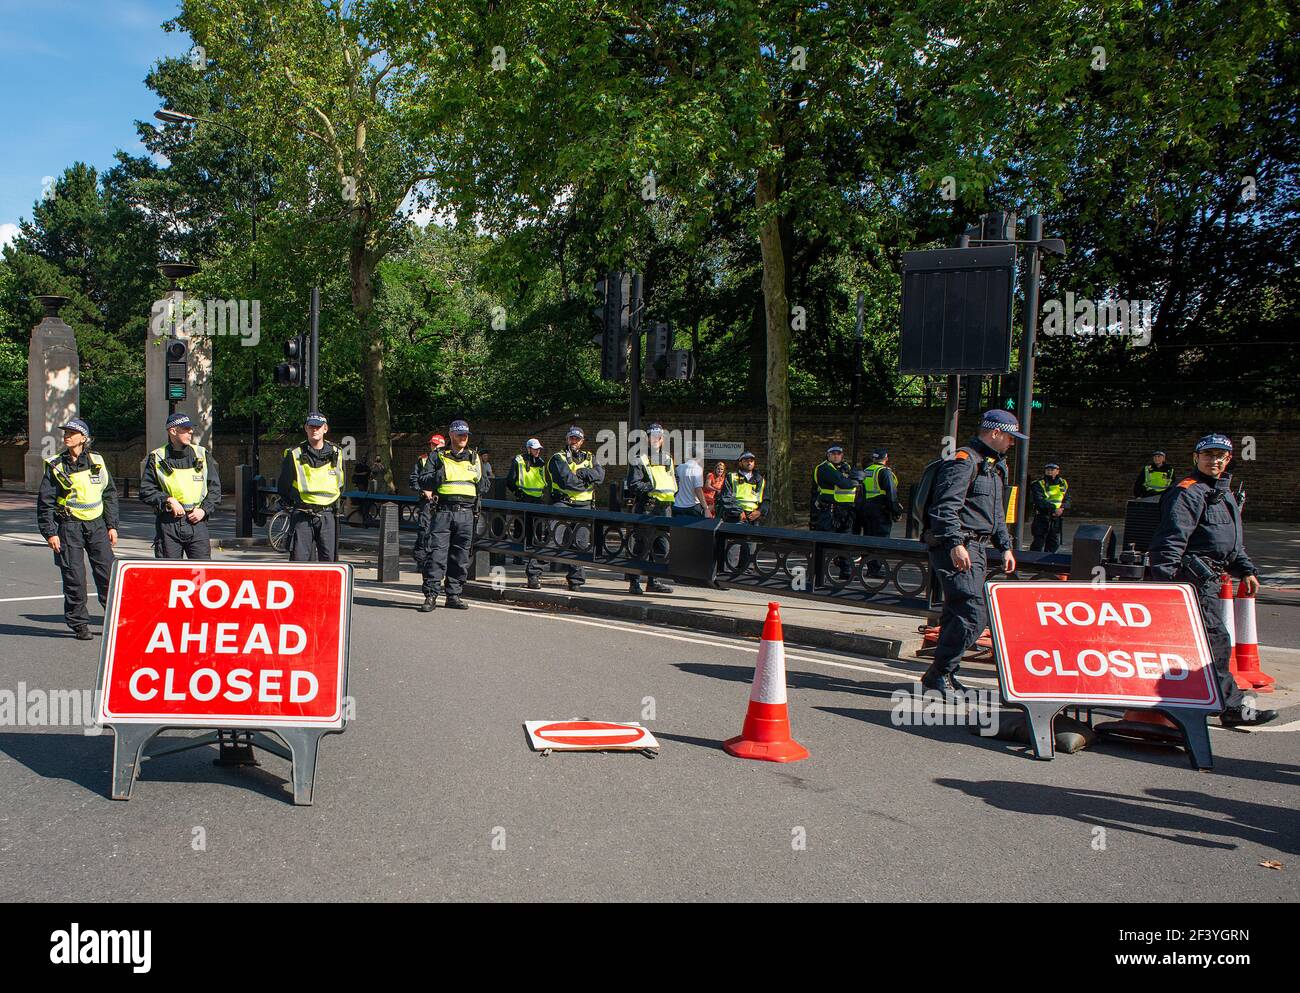 Metropolitan Police officers with road signs, form a line to create a road block to divert a protest demonstration towards another route. Stock Photo